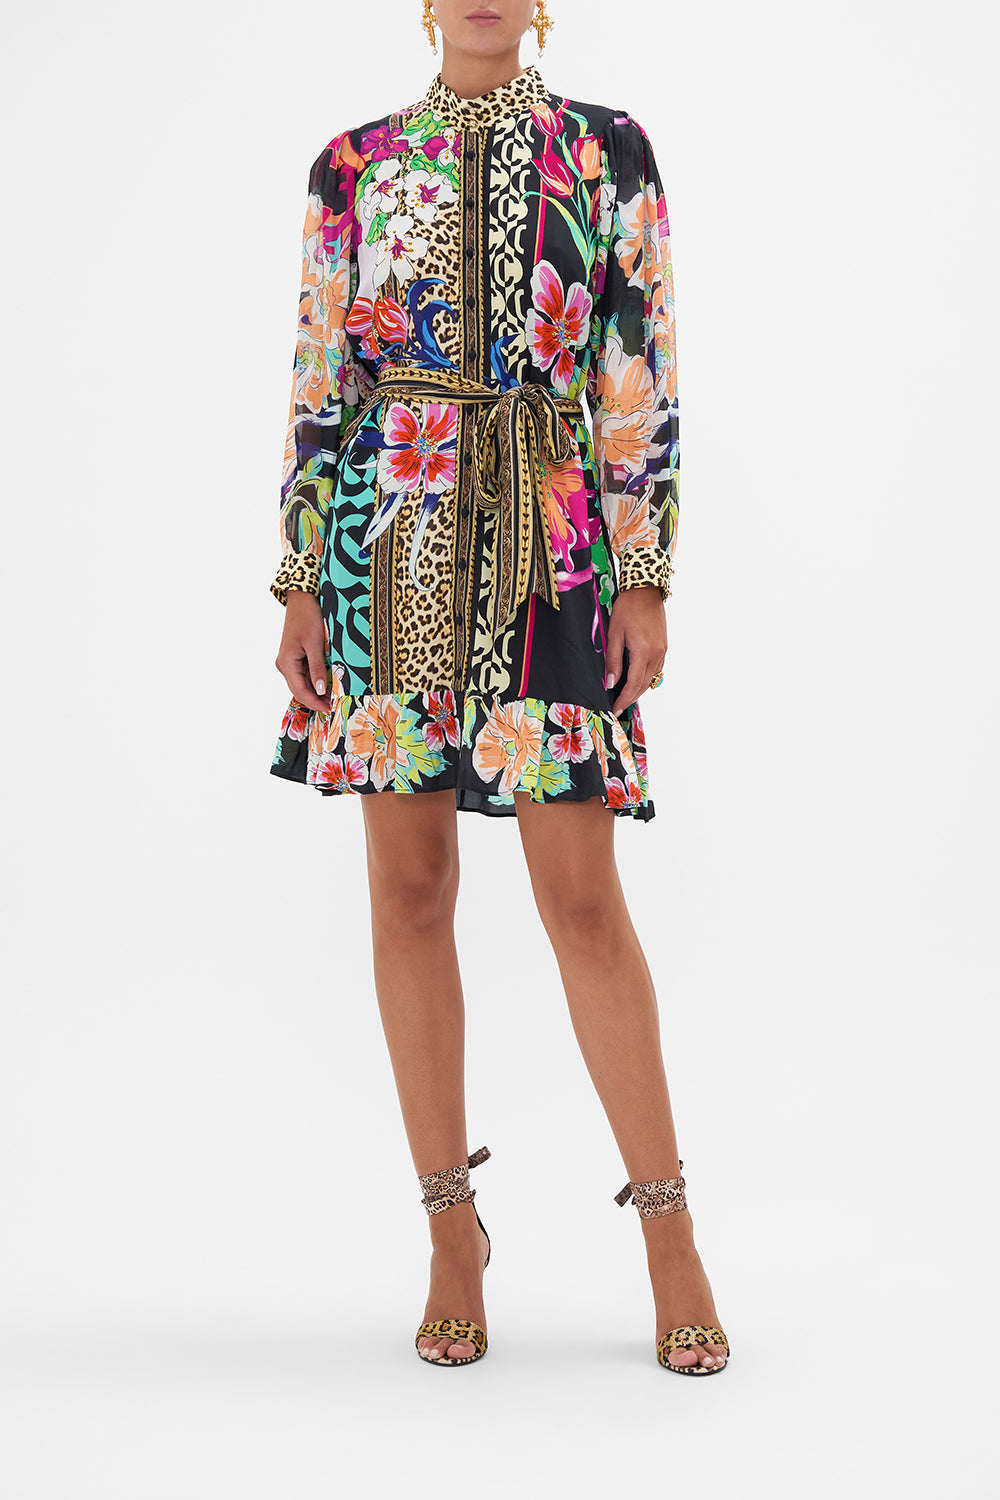 Front view of model wearing CAMILLA silk floral shirt dress in Printed Prima Vera print